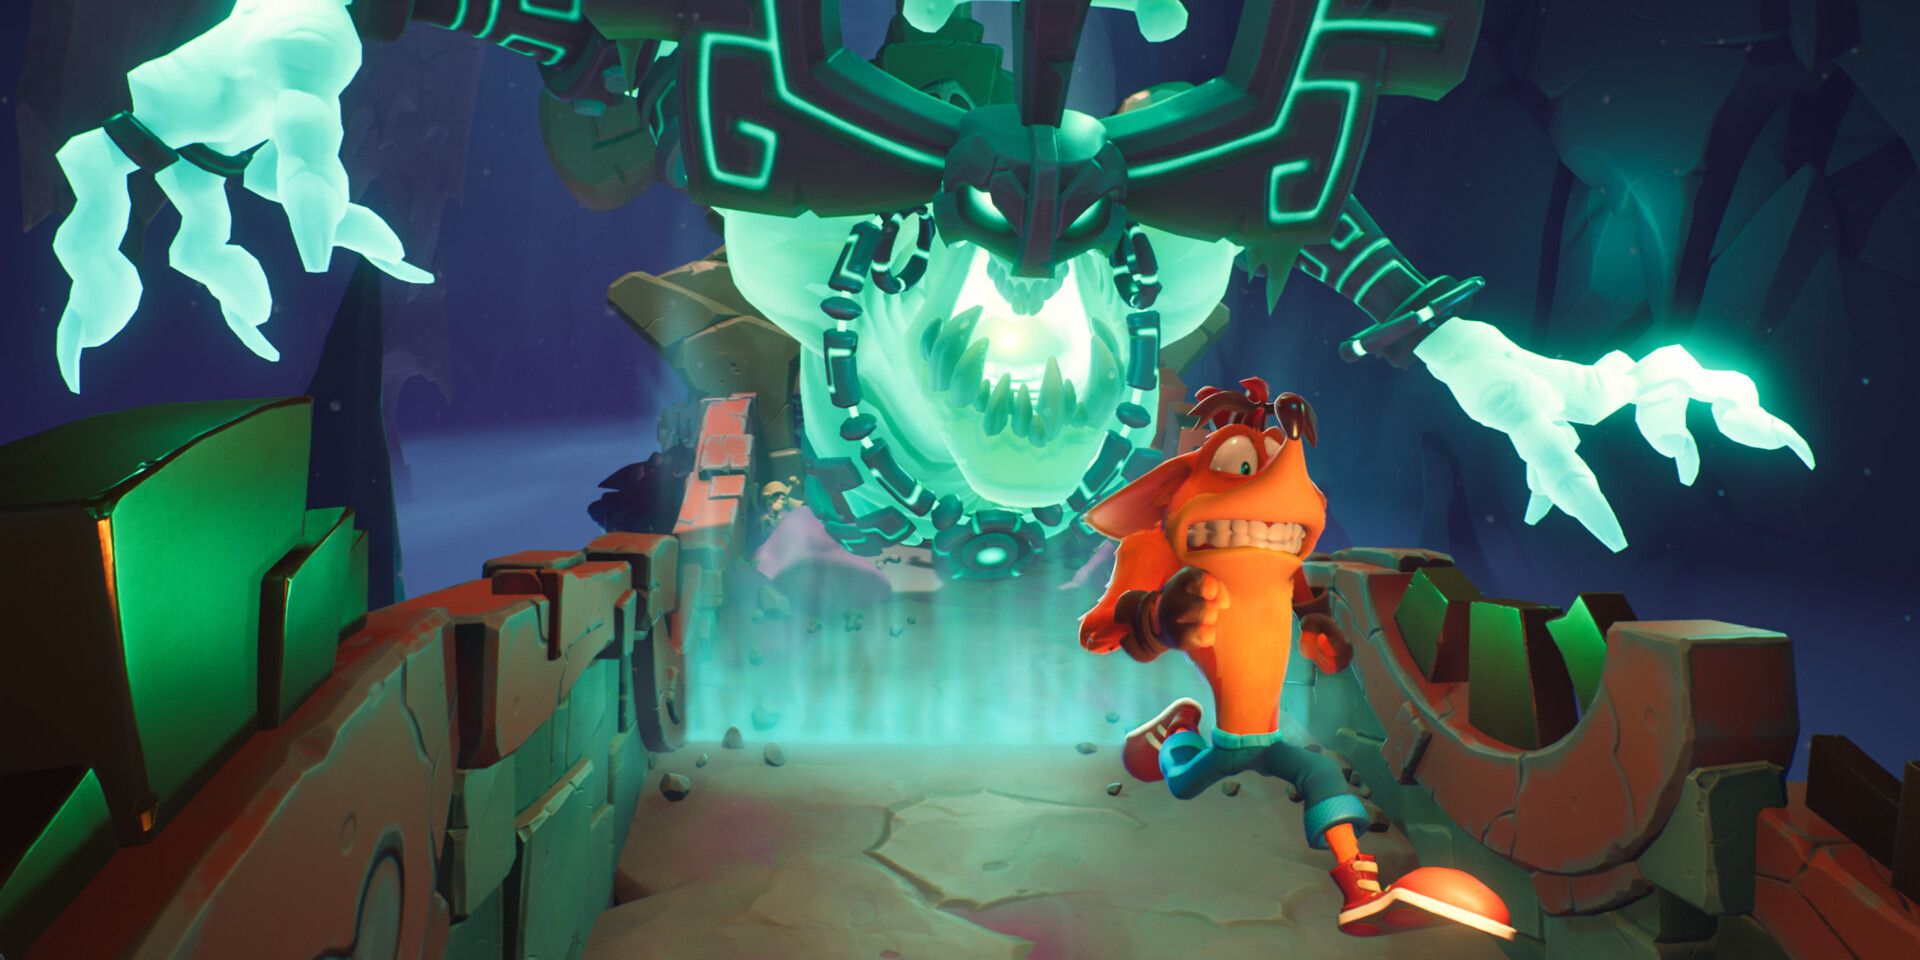 Crash runs from the Giant Ancient Ghost in Crash Bandicoot 4 It's About Time